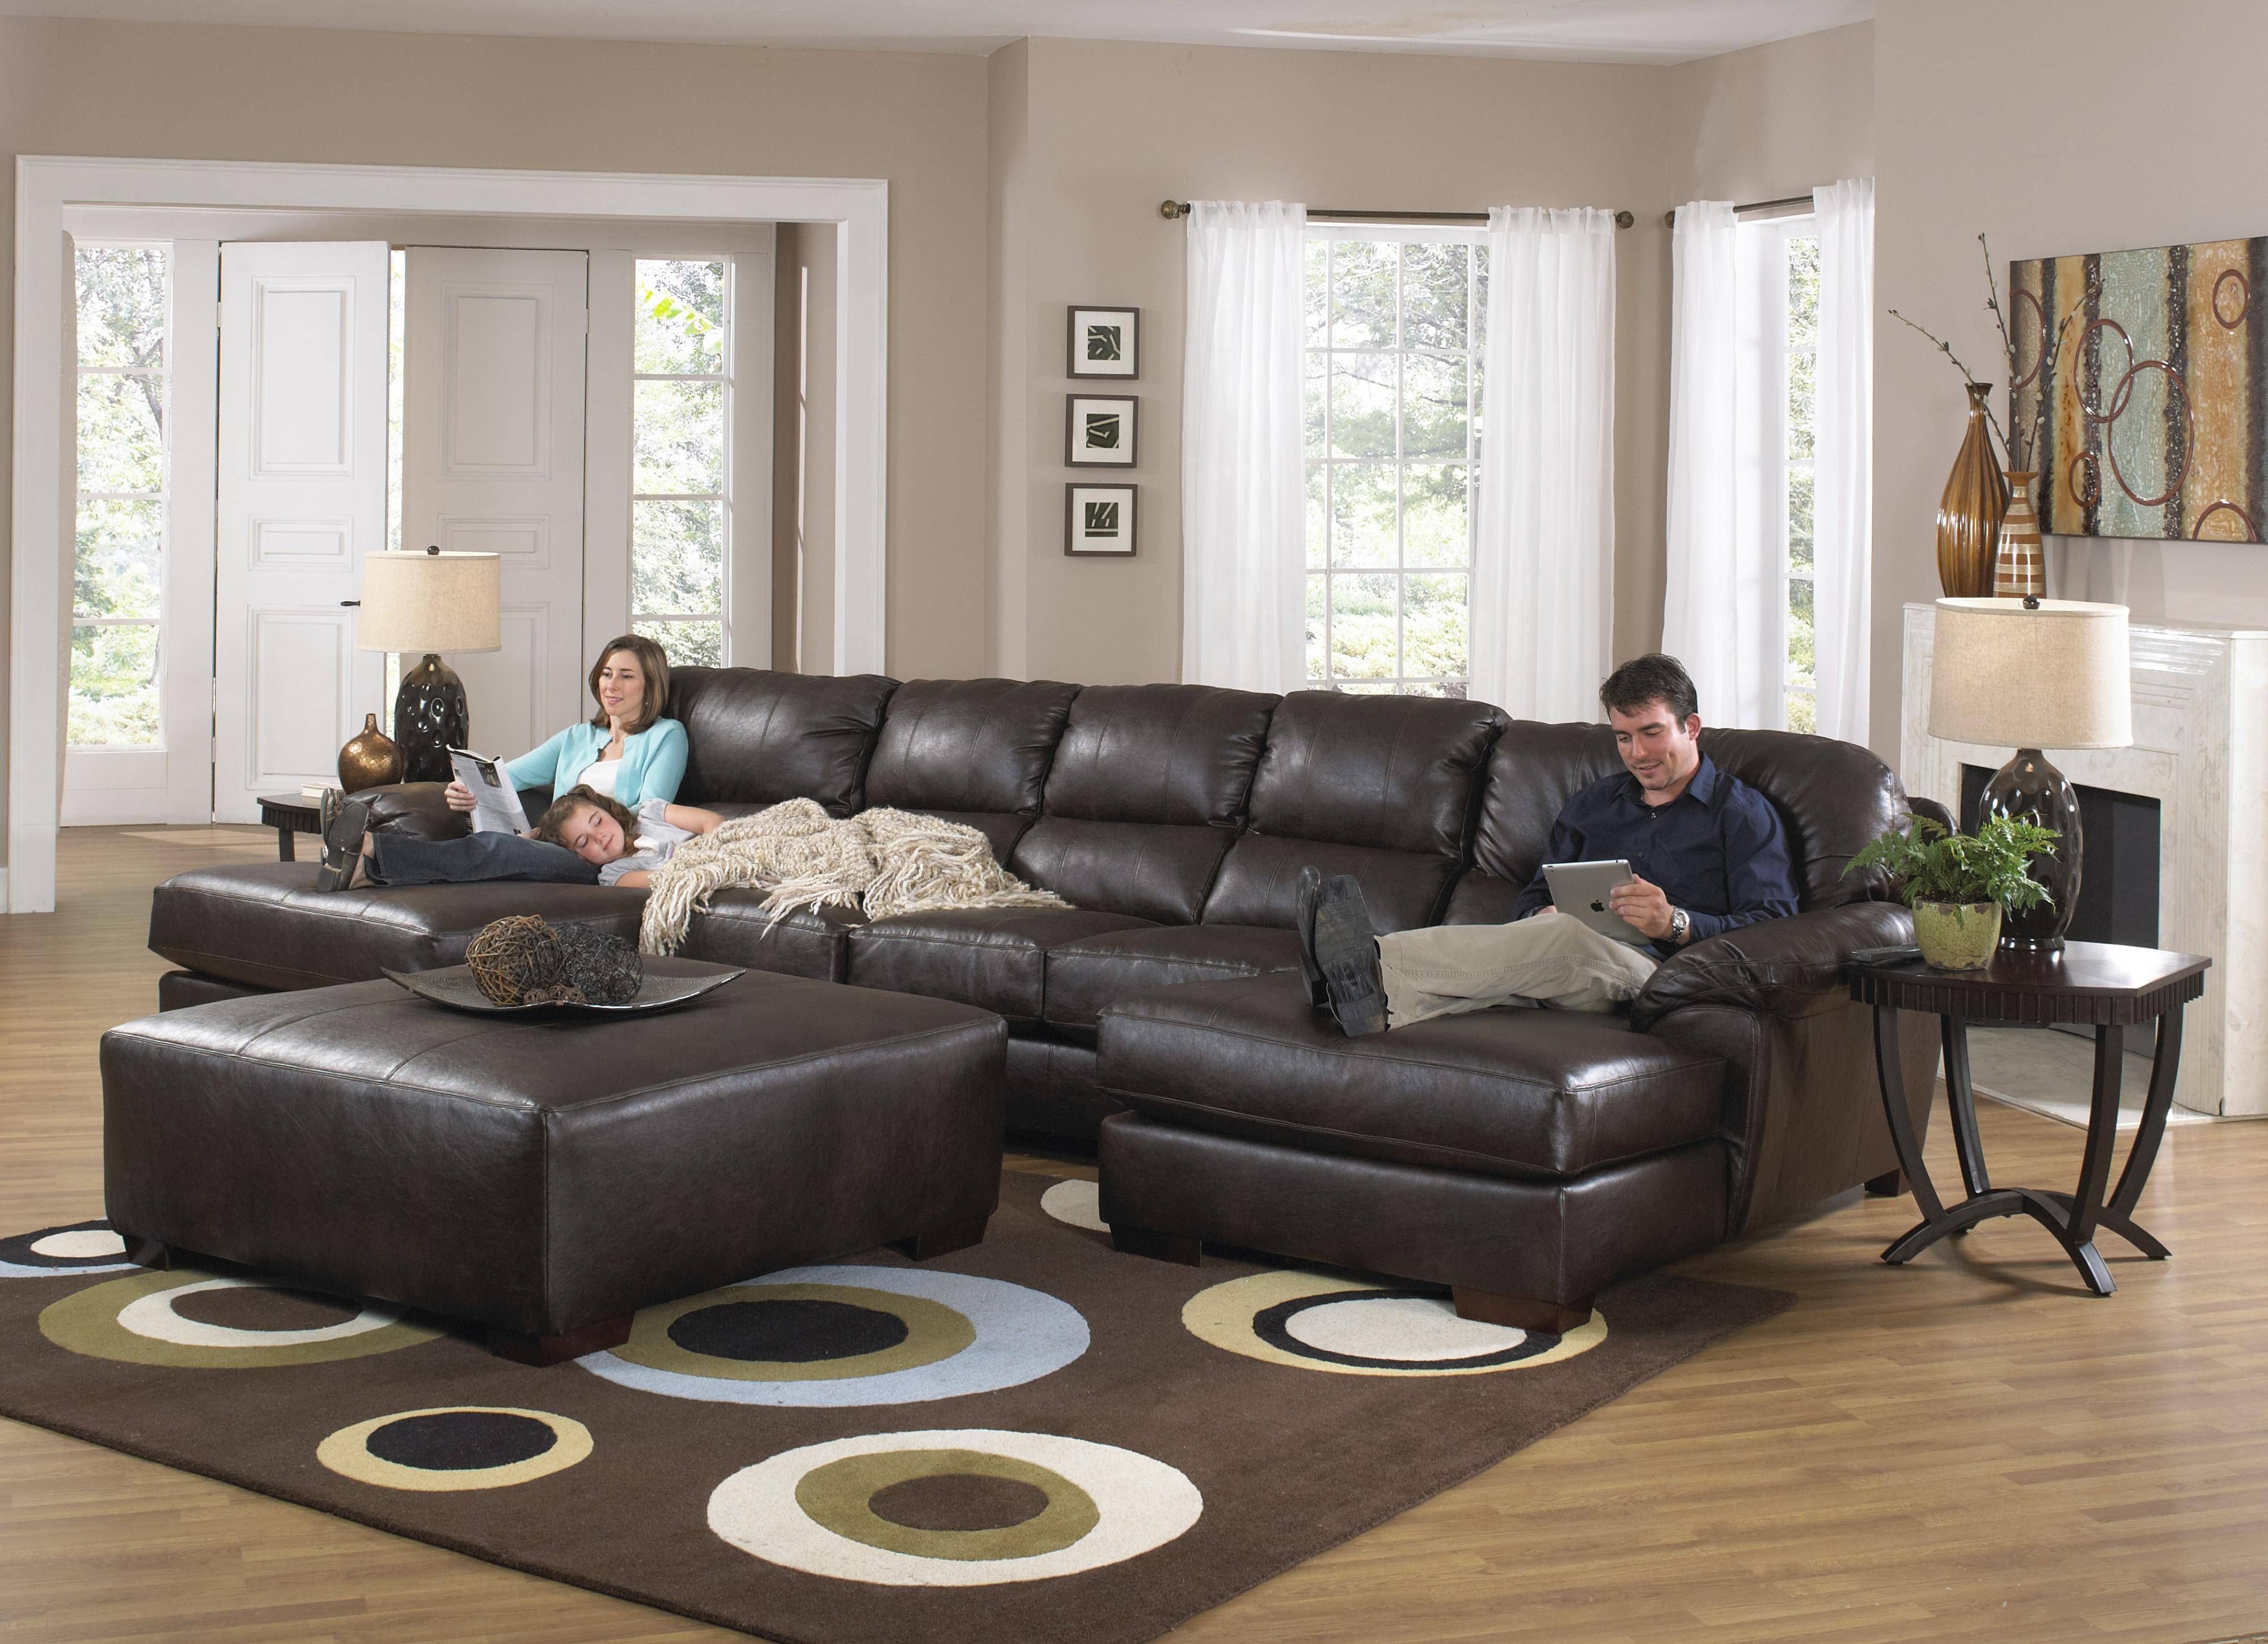 Dual Reclining Chaise Sofa | Centerfieldbar Regarding Sofas And Chaises Lounge Sets (View 14 of 15)